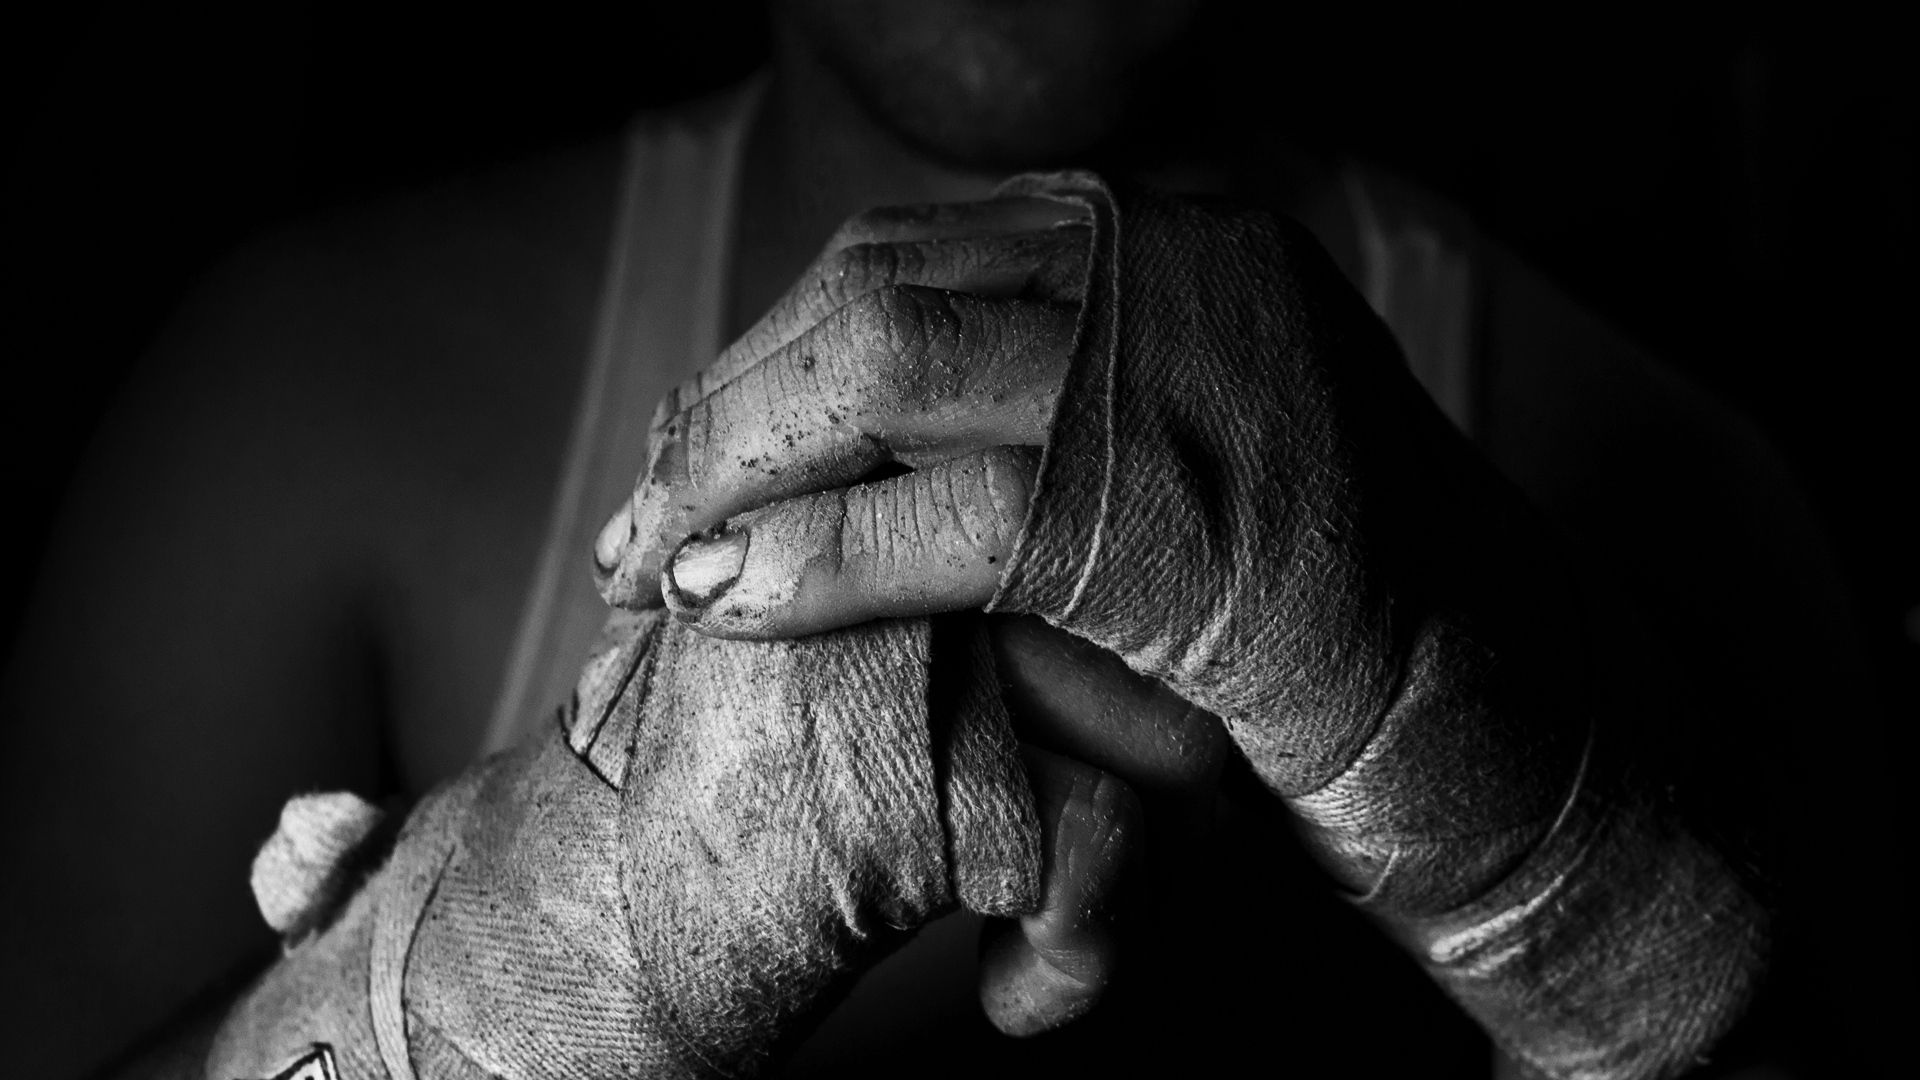 Free HD sports, chb, hands, bw, fighter, bandages